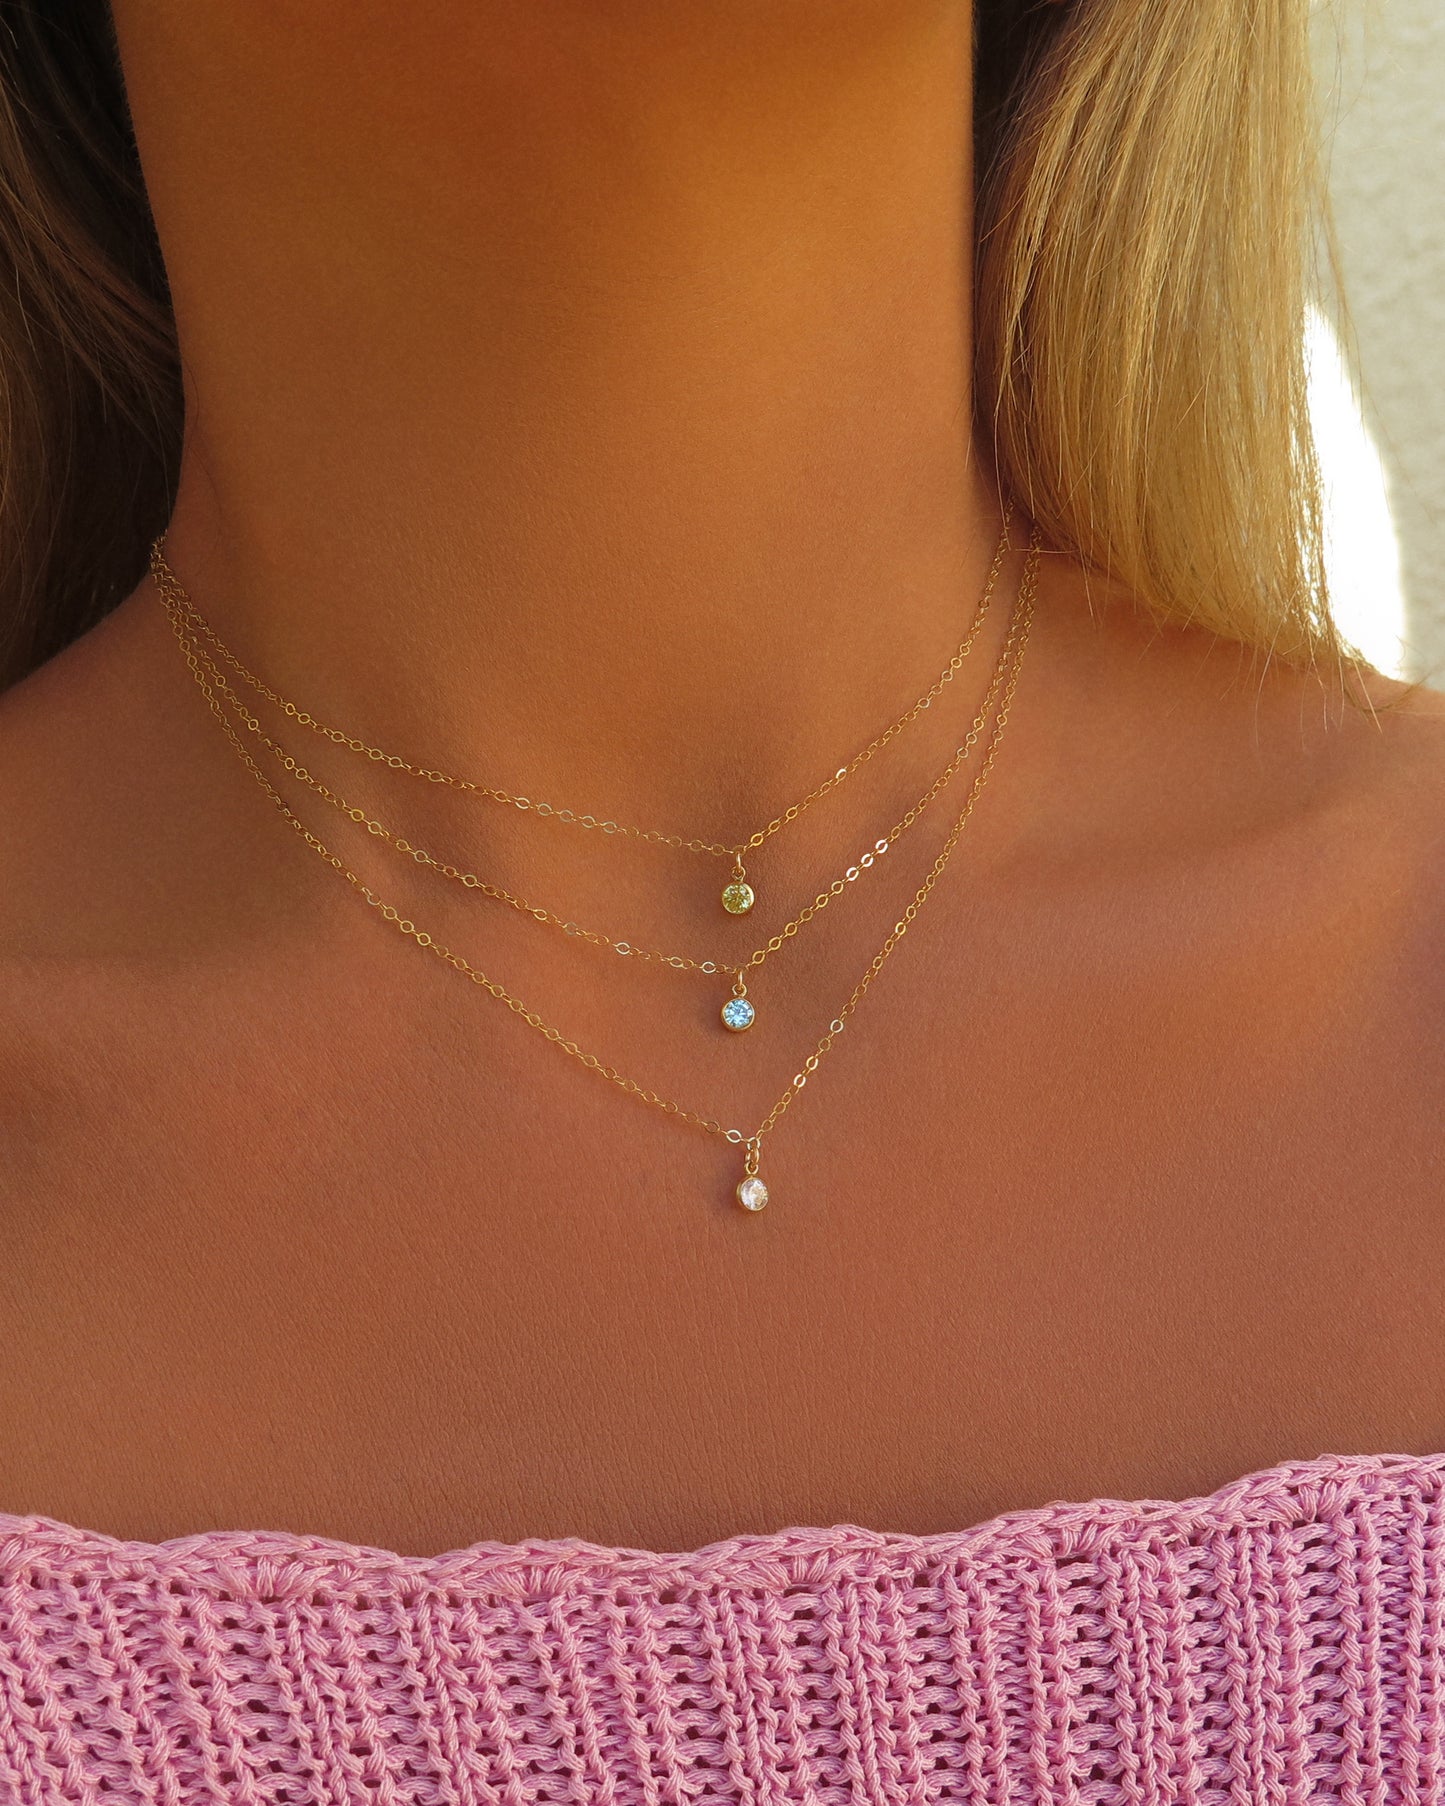 Small Birthstone Necklace - 14K Yellow Gold Fill